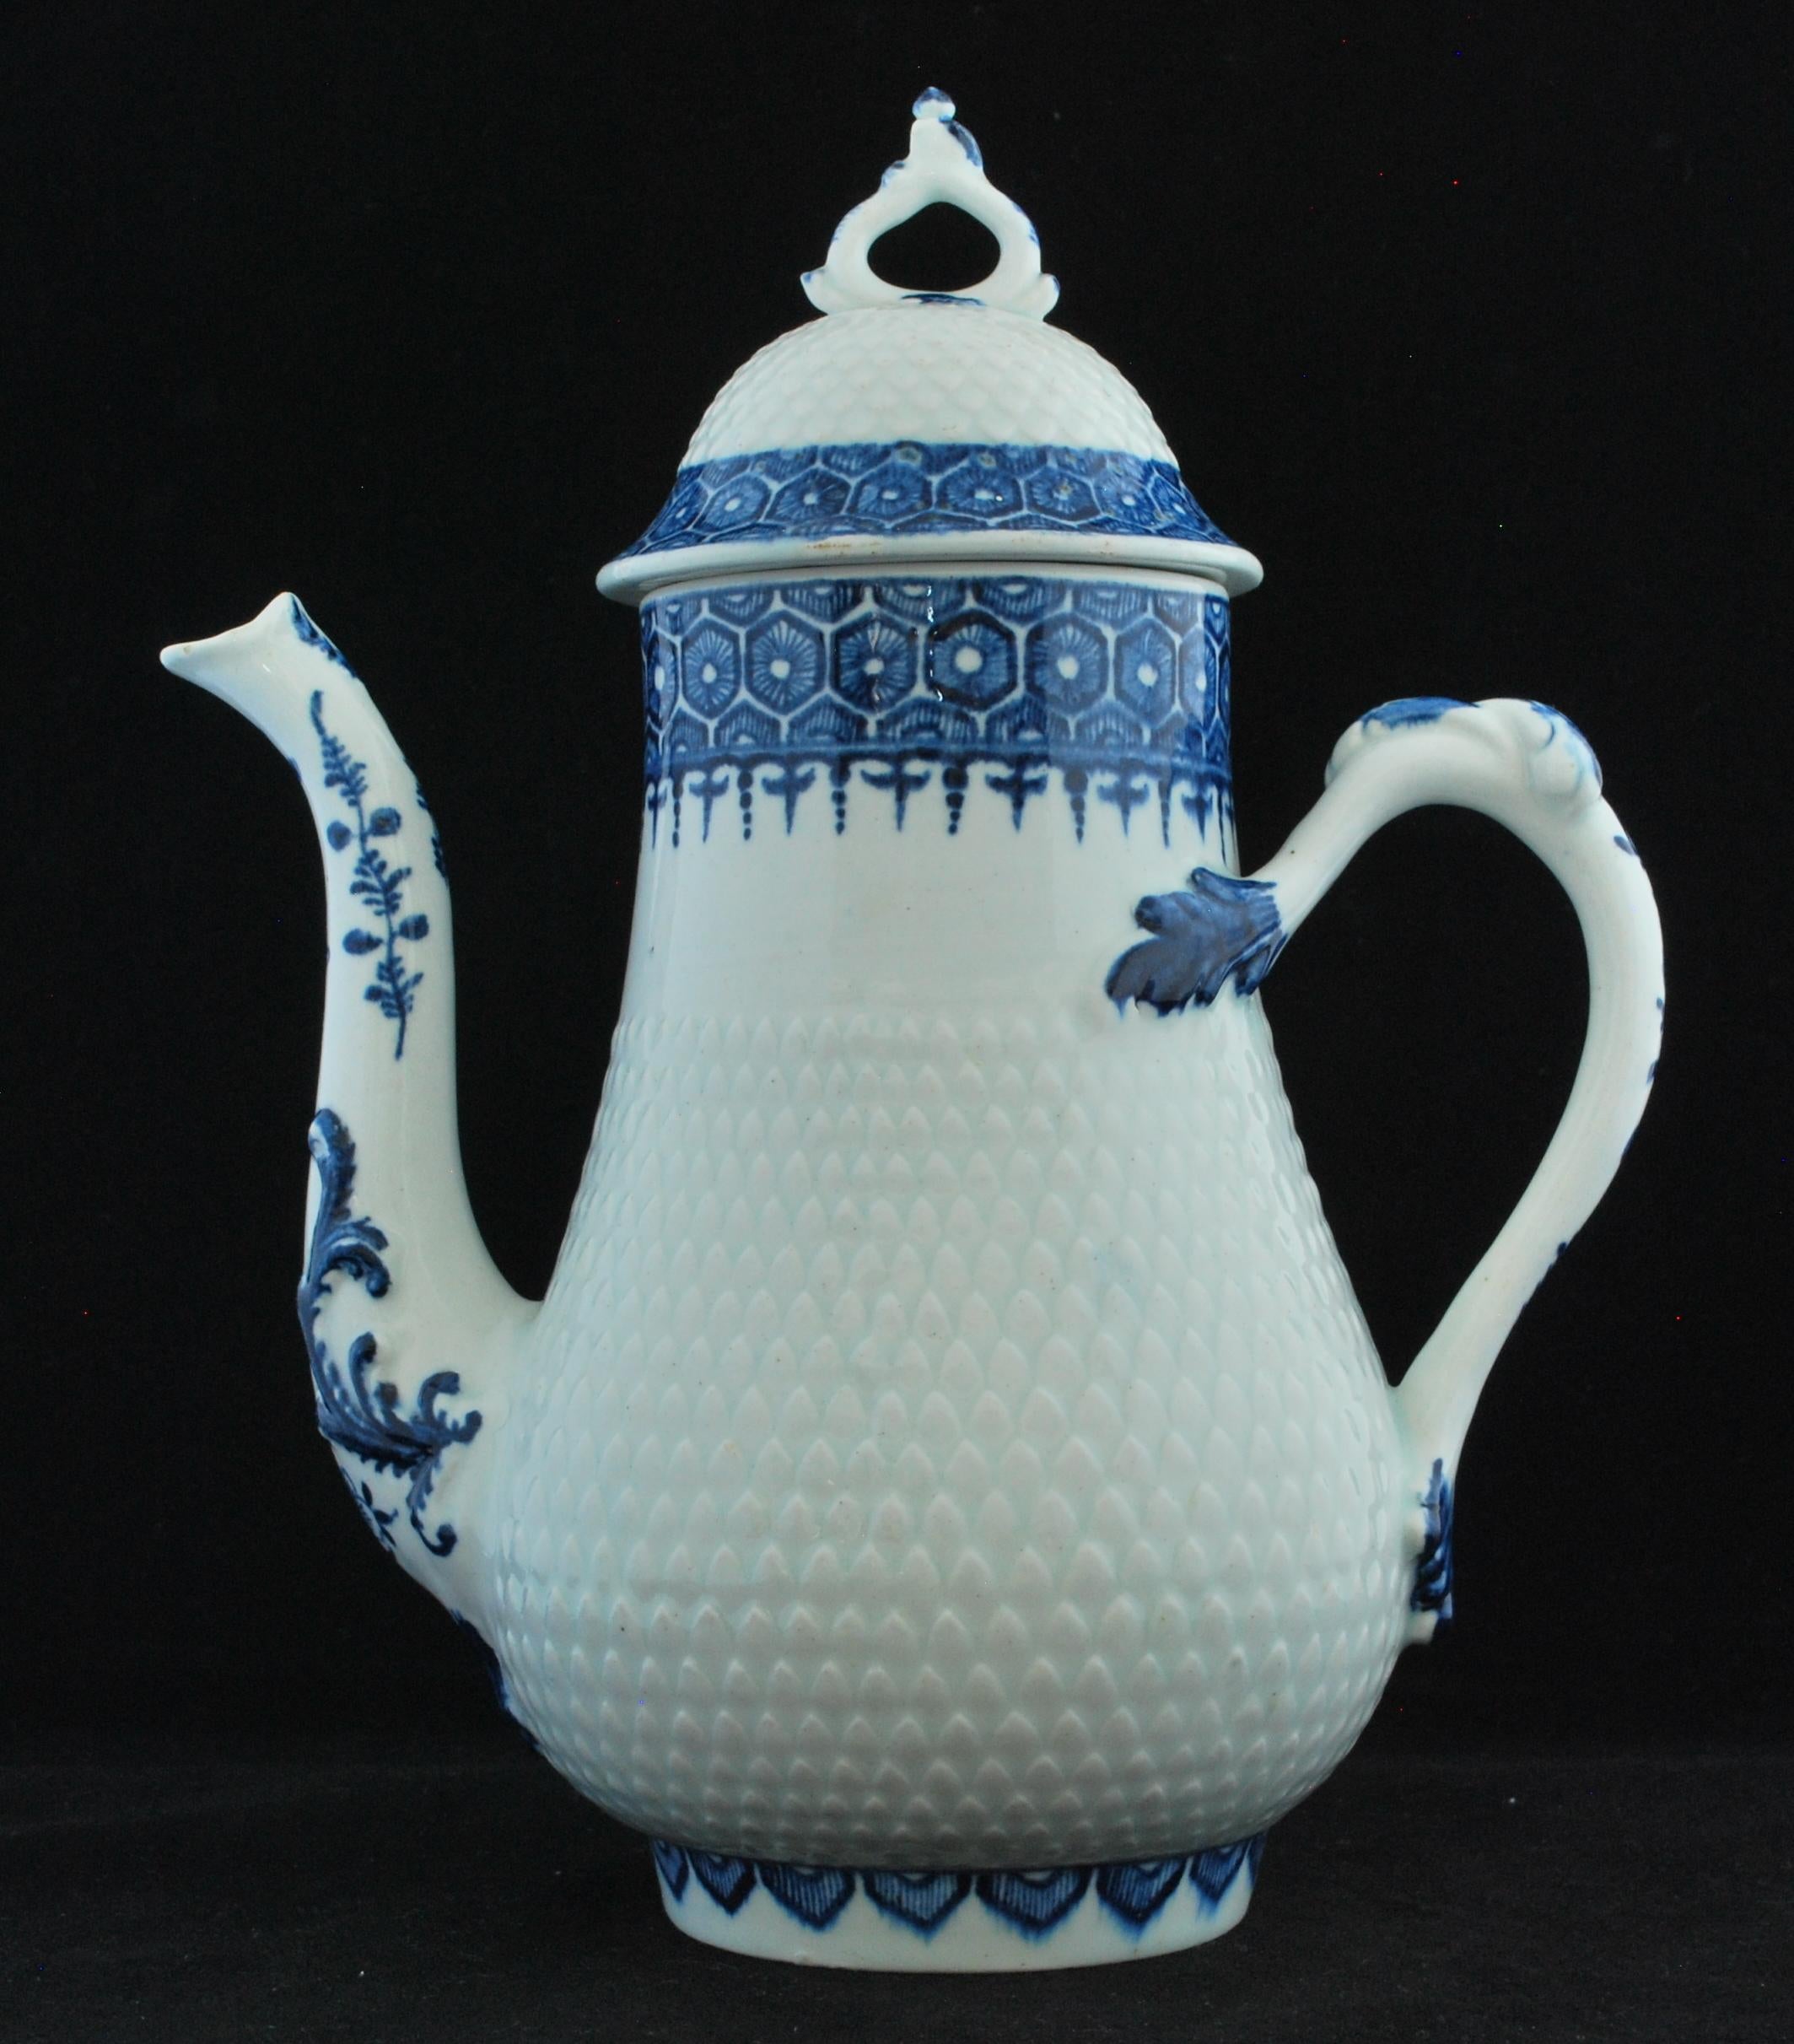 Coffee pot, circa 1765-69: Coffee pot and cover of silver form with domed cover; the body of the pot and dome of the cover pineapple moulded between rims painted in blue with cell and diaper borders; the spout of curving swan-mouth form moulded with